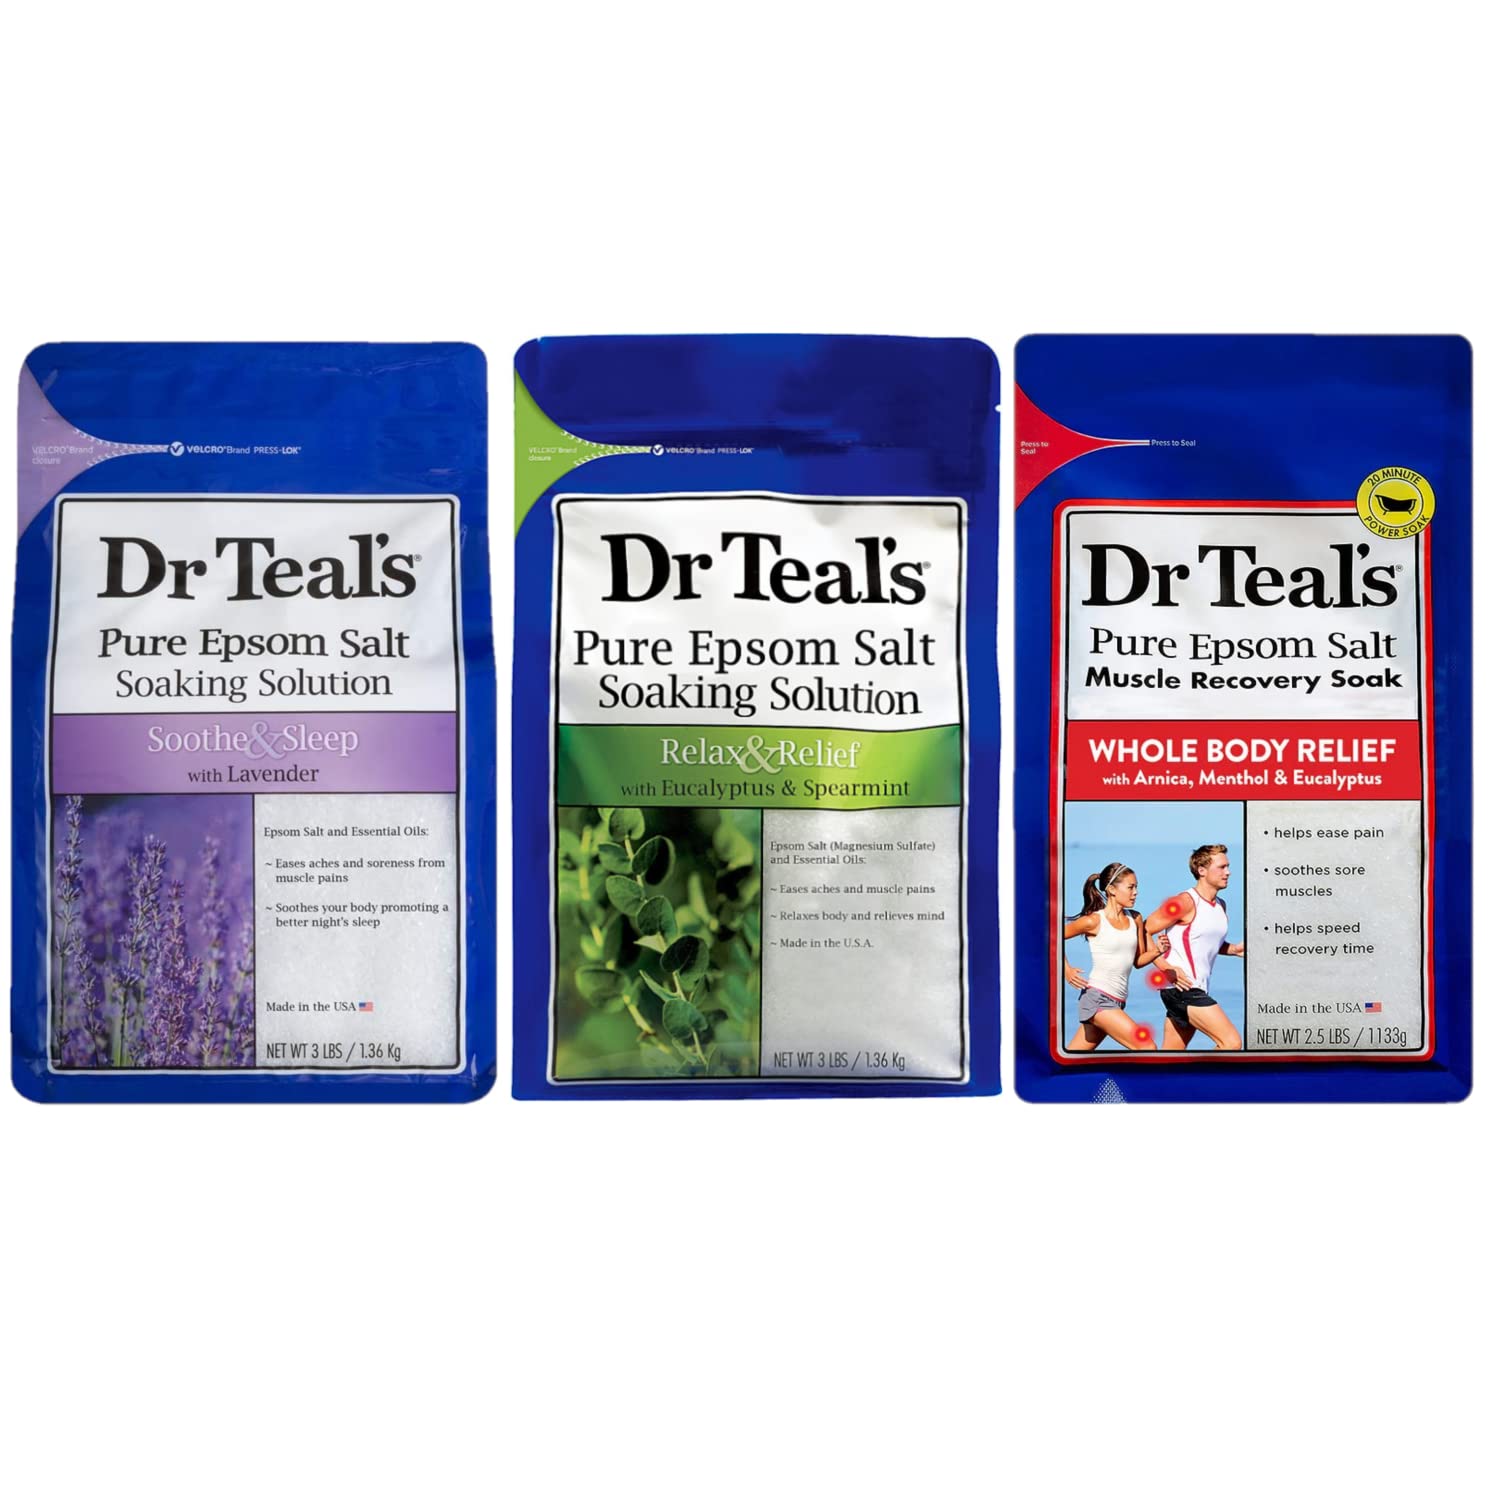 Dr Teals Epsom Salt Soak Combo (8.5 lbs Total) - Soothe & Sleep with Lavender, Relax & Relief with Eucalyptus & Spearmint, and Muscle Recovery with Arnica & Menthol - Treat Skin & Relieve Sore Muscles